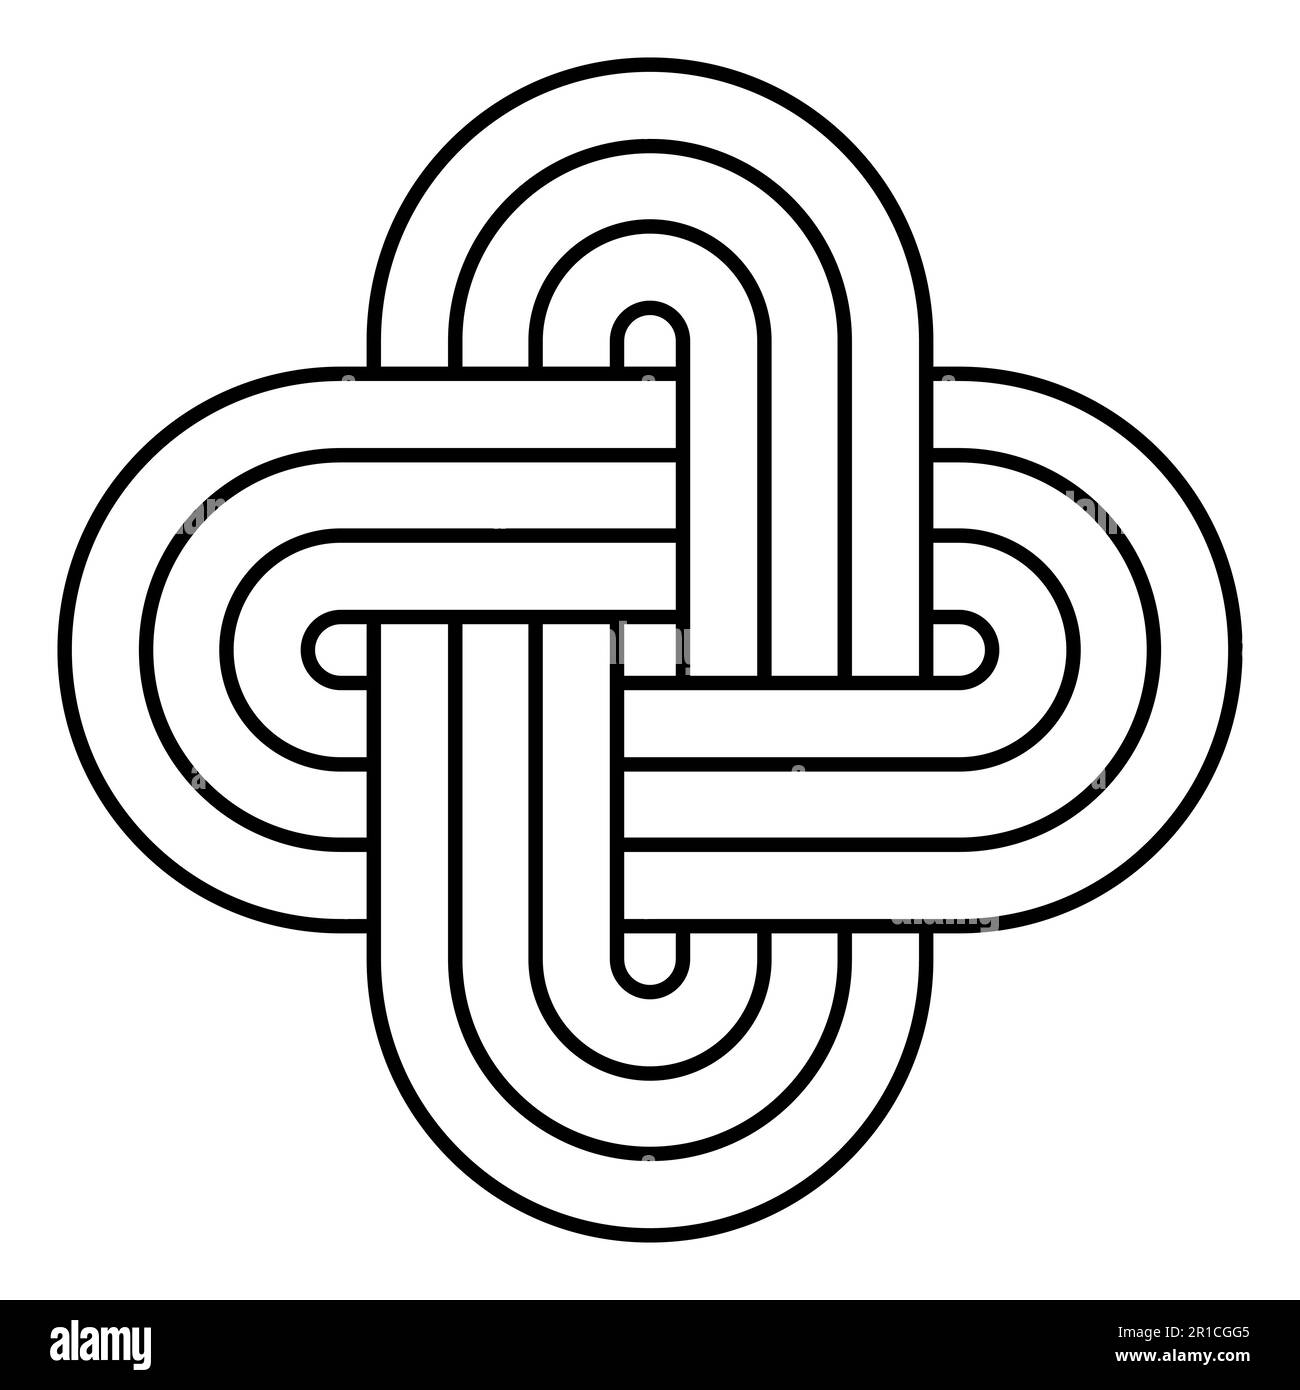 Solomons knot, an ancient symbol and traditional decorative motif. Sigillum Salomonis, a link and not a true knot, consisting of two closed loops. Stock Photo